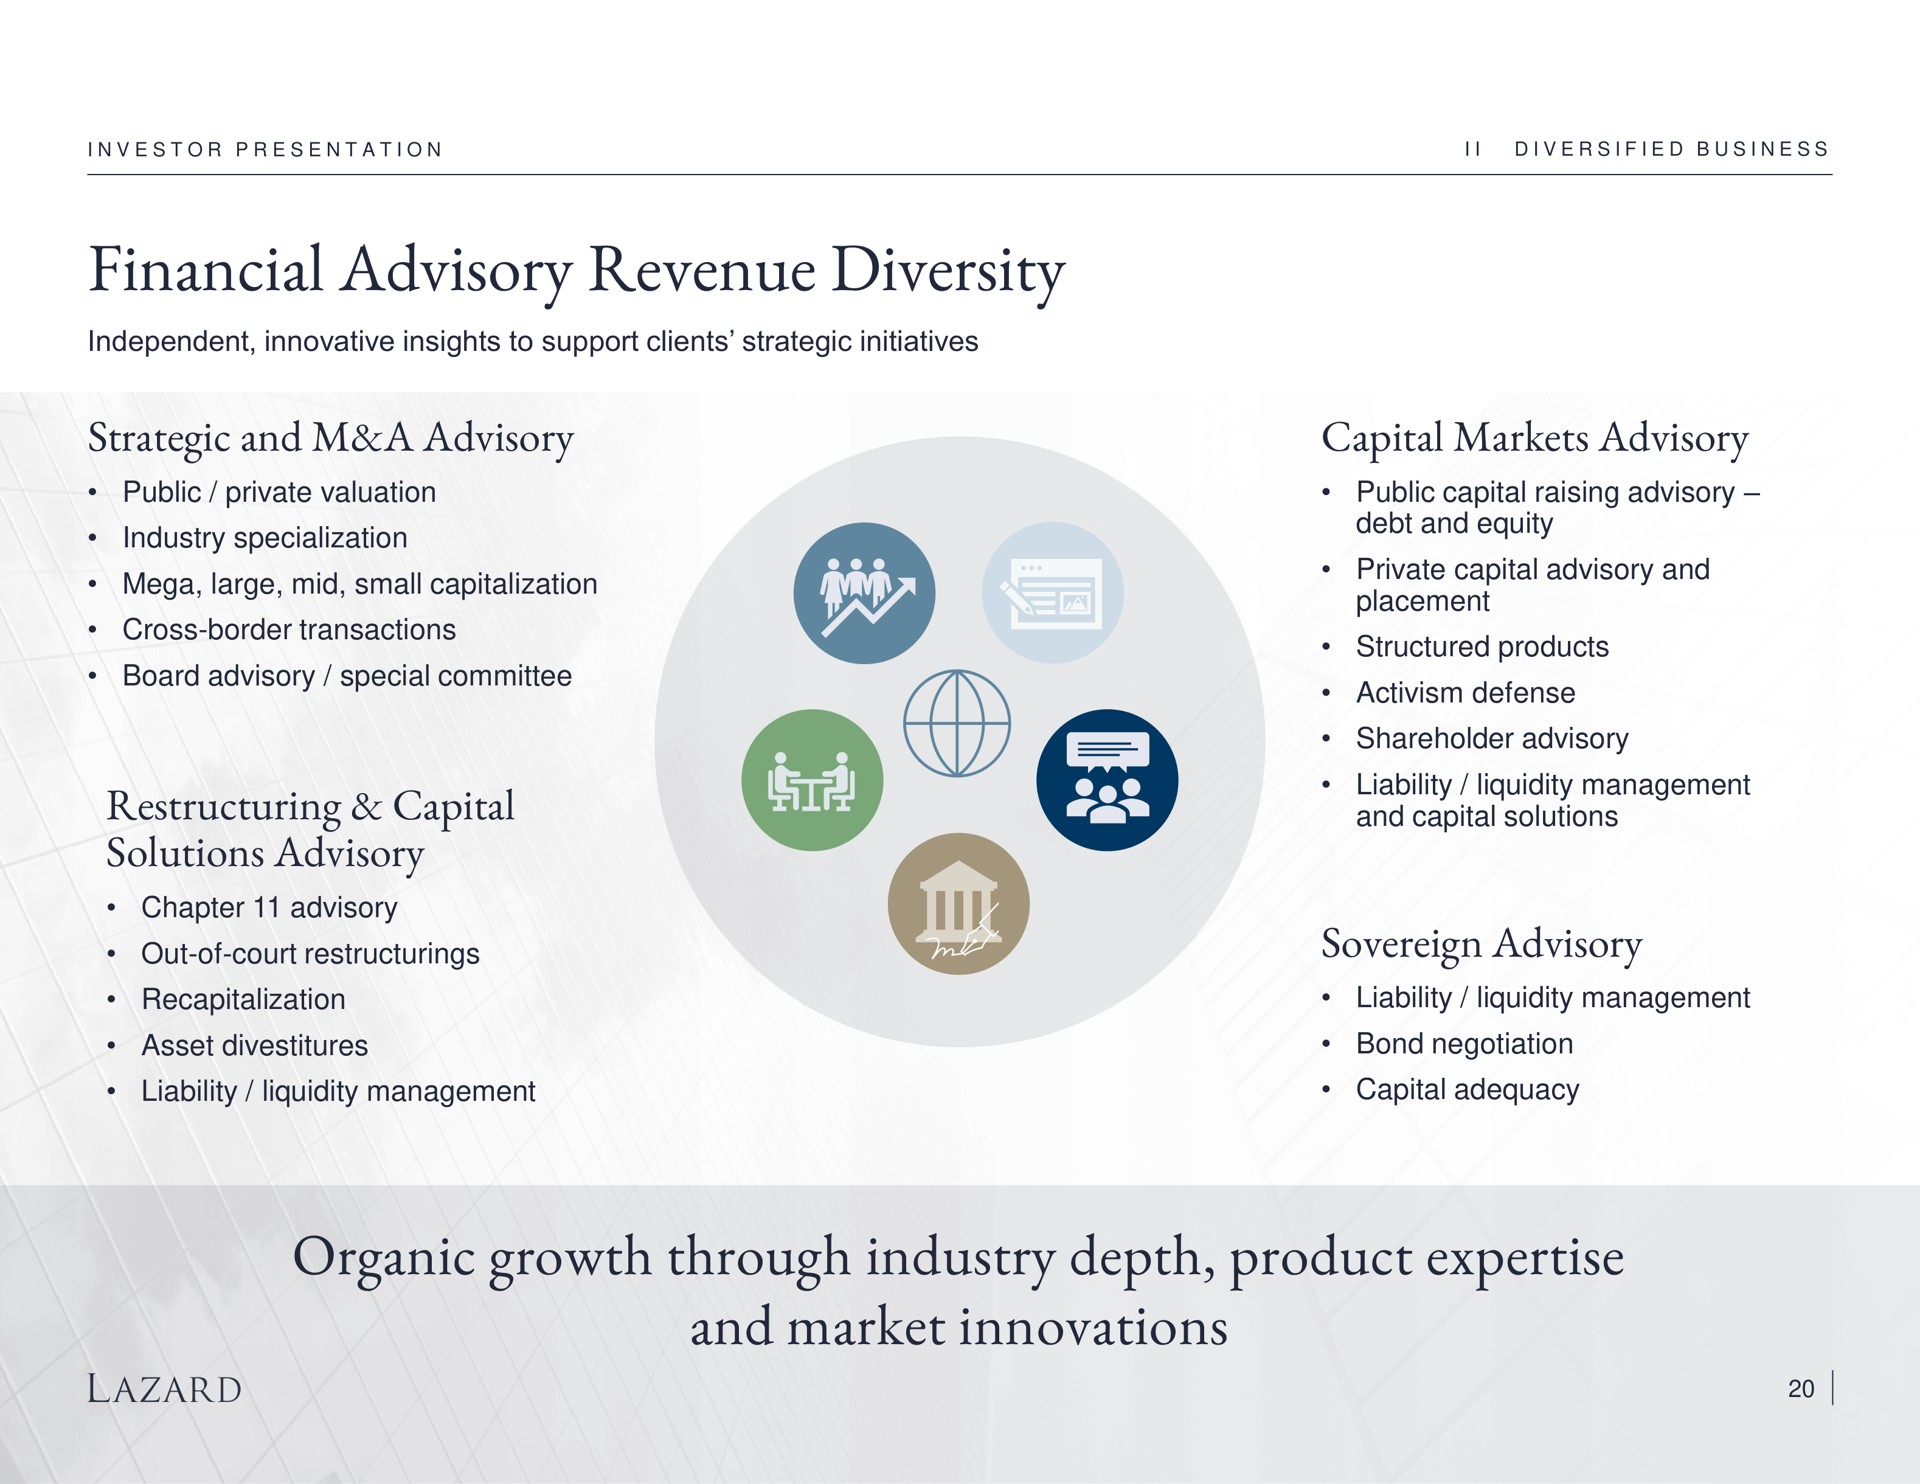 financial advisory revenue diversity strategic and a advisory capital solutions advisory capital markets advisory sovereign advisory organic growth through industry depth product and market innovations specialization out of court debt equity | Lazard